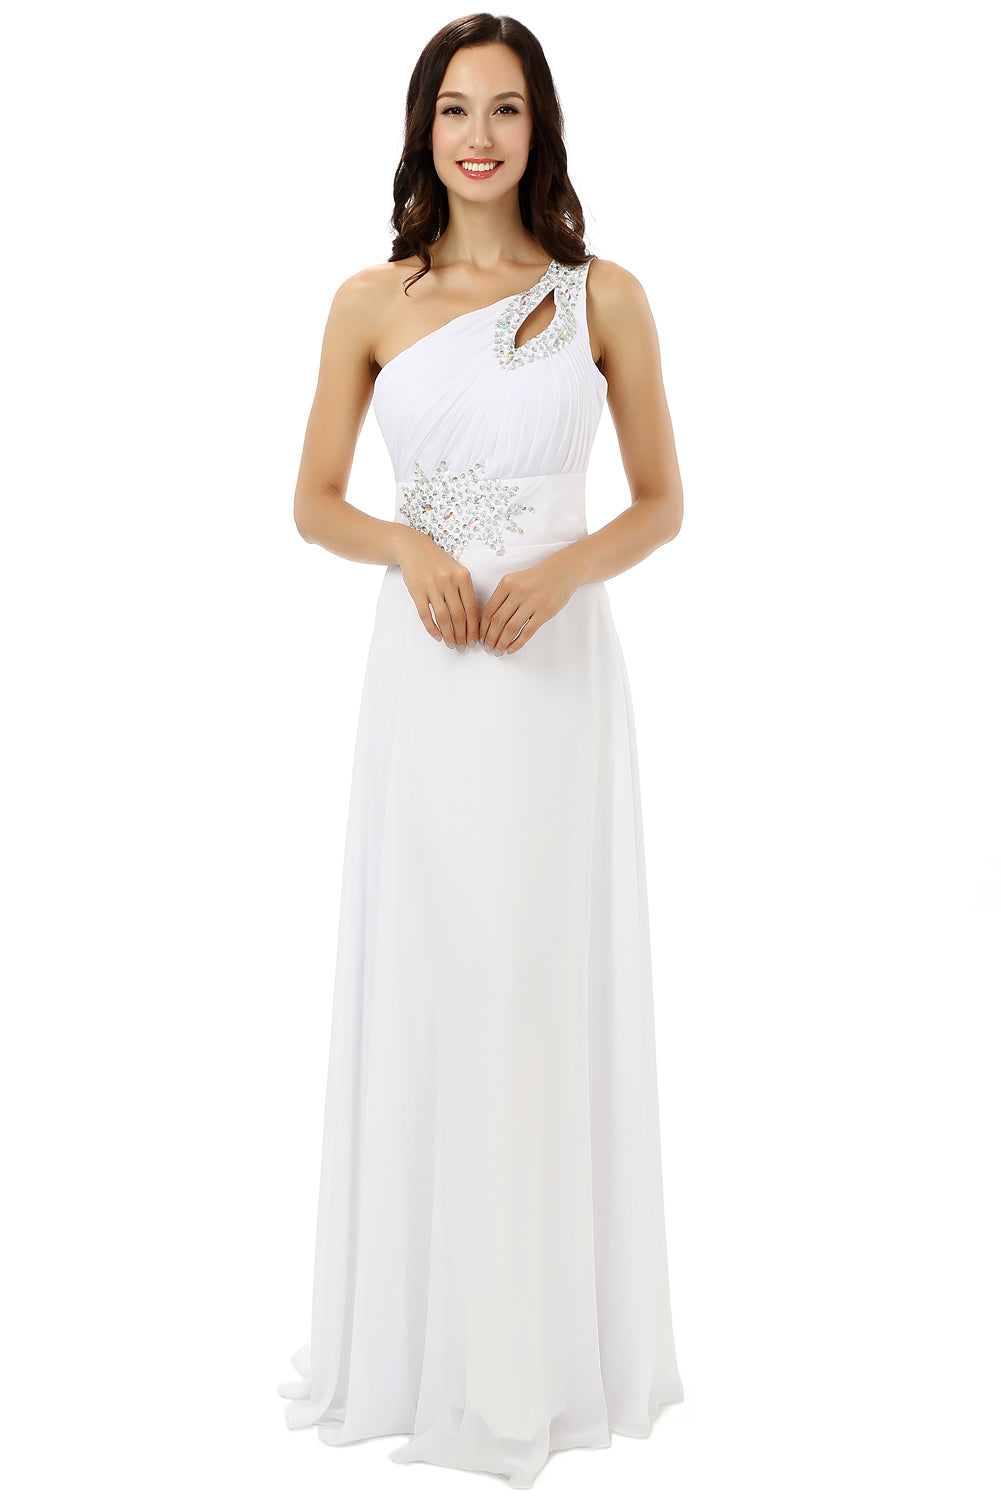 White One Shoulder Chiffon Pleats Beading Corset Bridesmaid Dresses outfit, Party Dress Teen